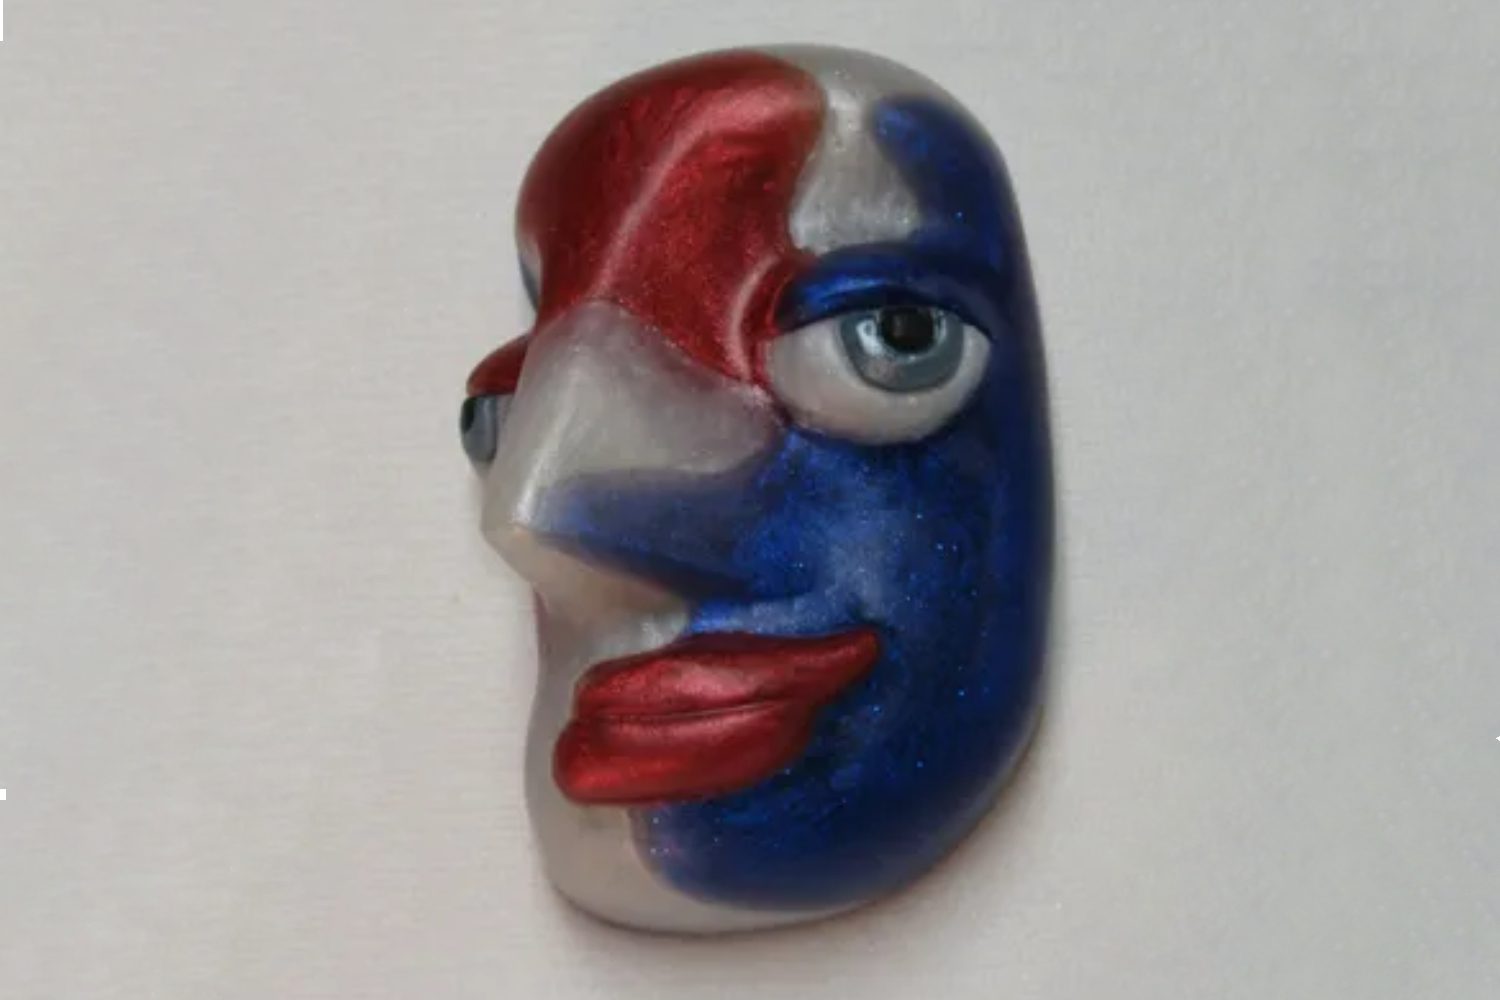 A blue, white and red face with a big eye.